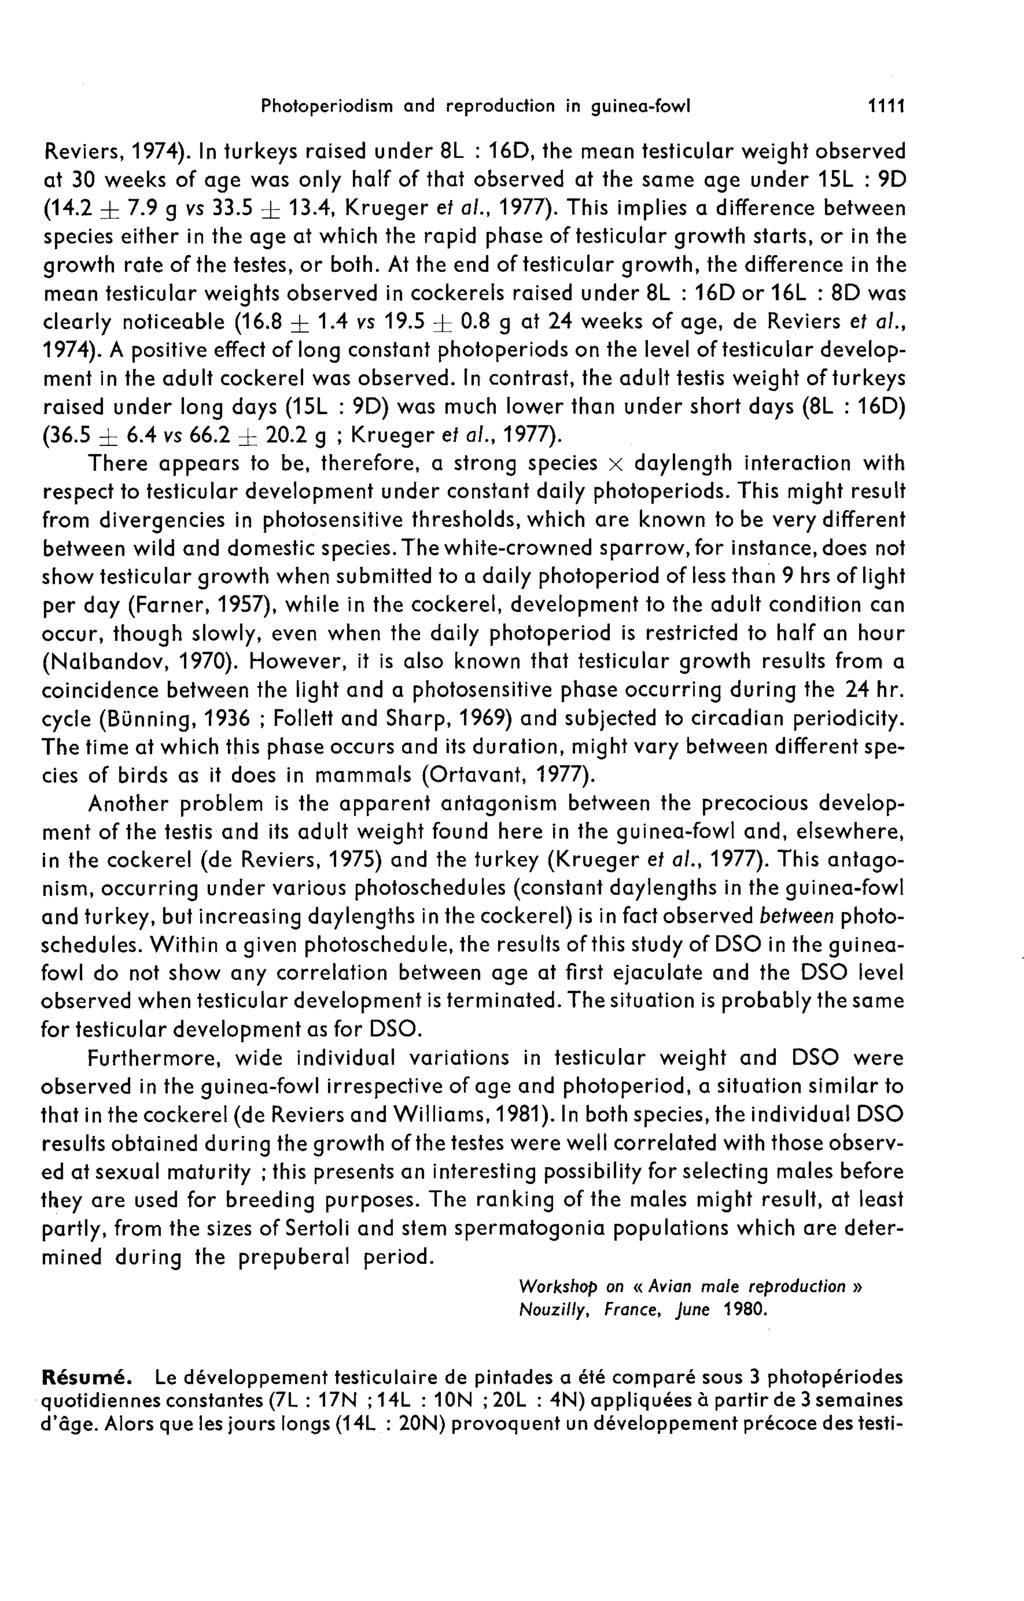 Reviers, 1974). In turkeys raised under 8L : 16D, the mean testicular weight observed at 30 weeks of age was only half of that observed at the same age under 15L : 9D (14.2! 7.9 g vs 33.5! 13.